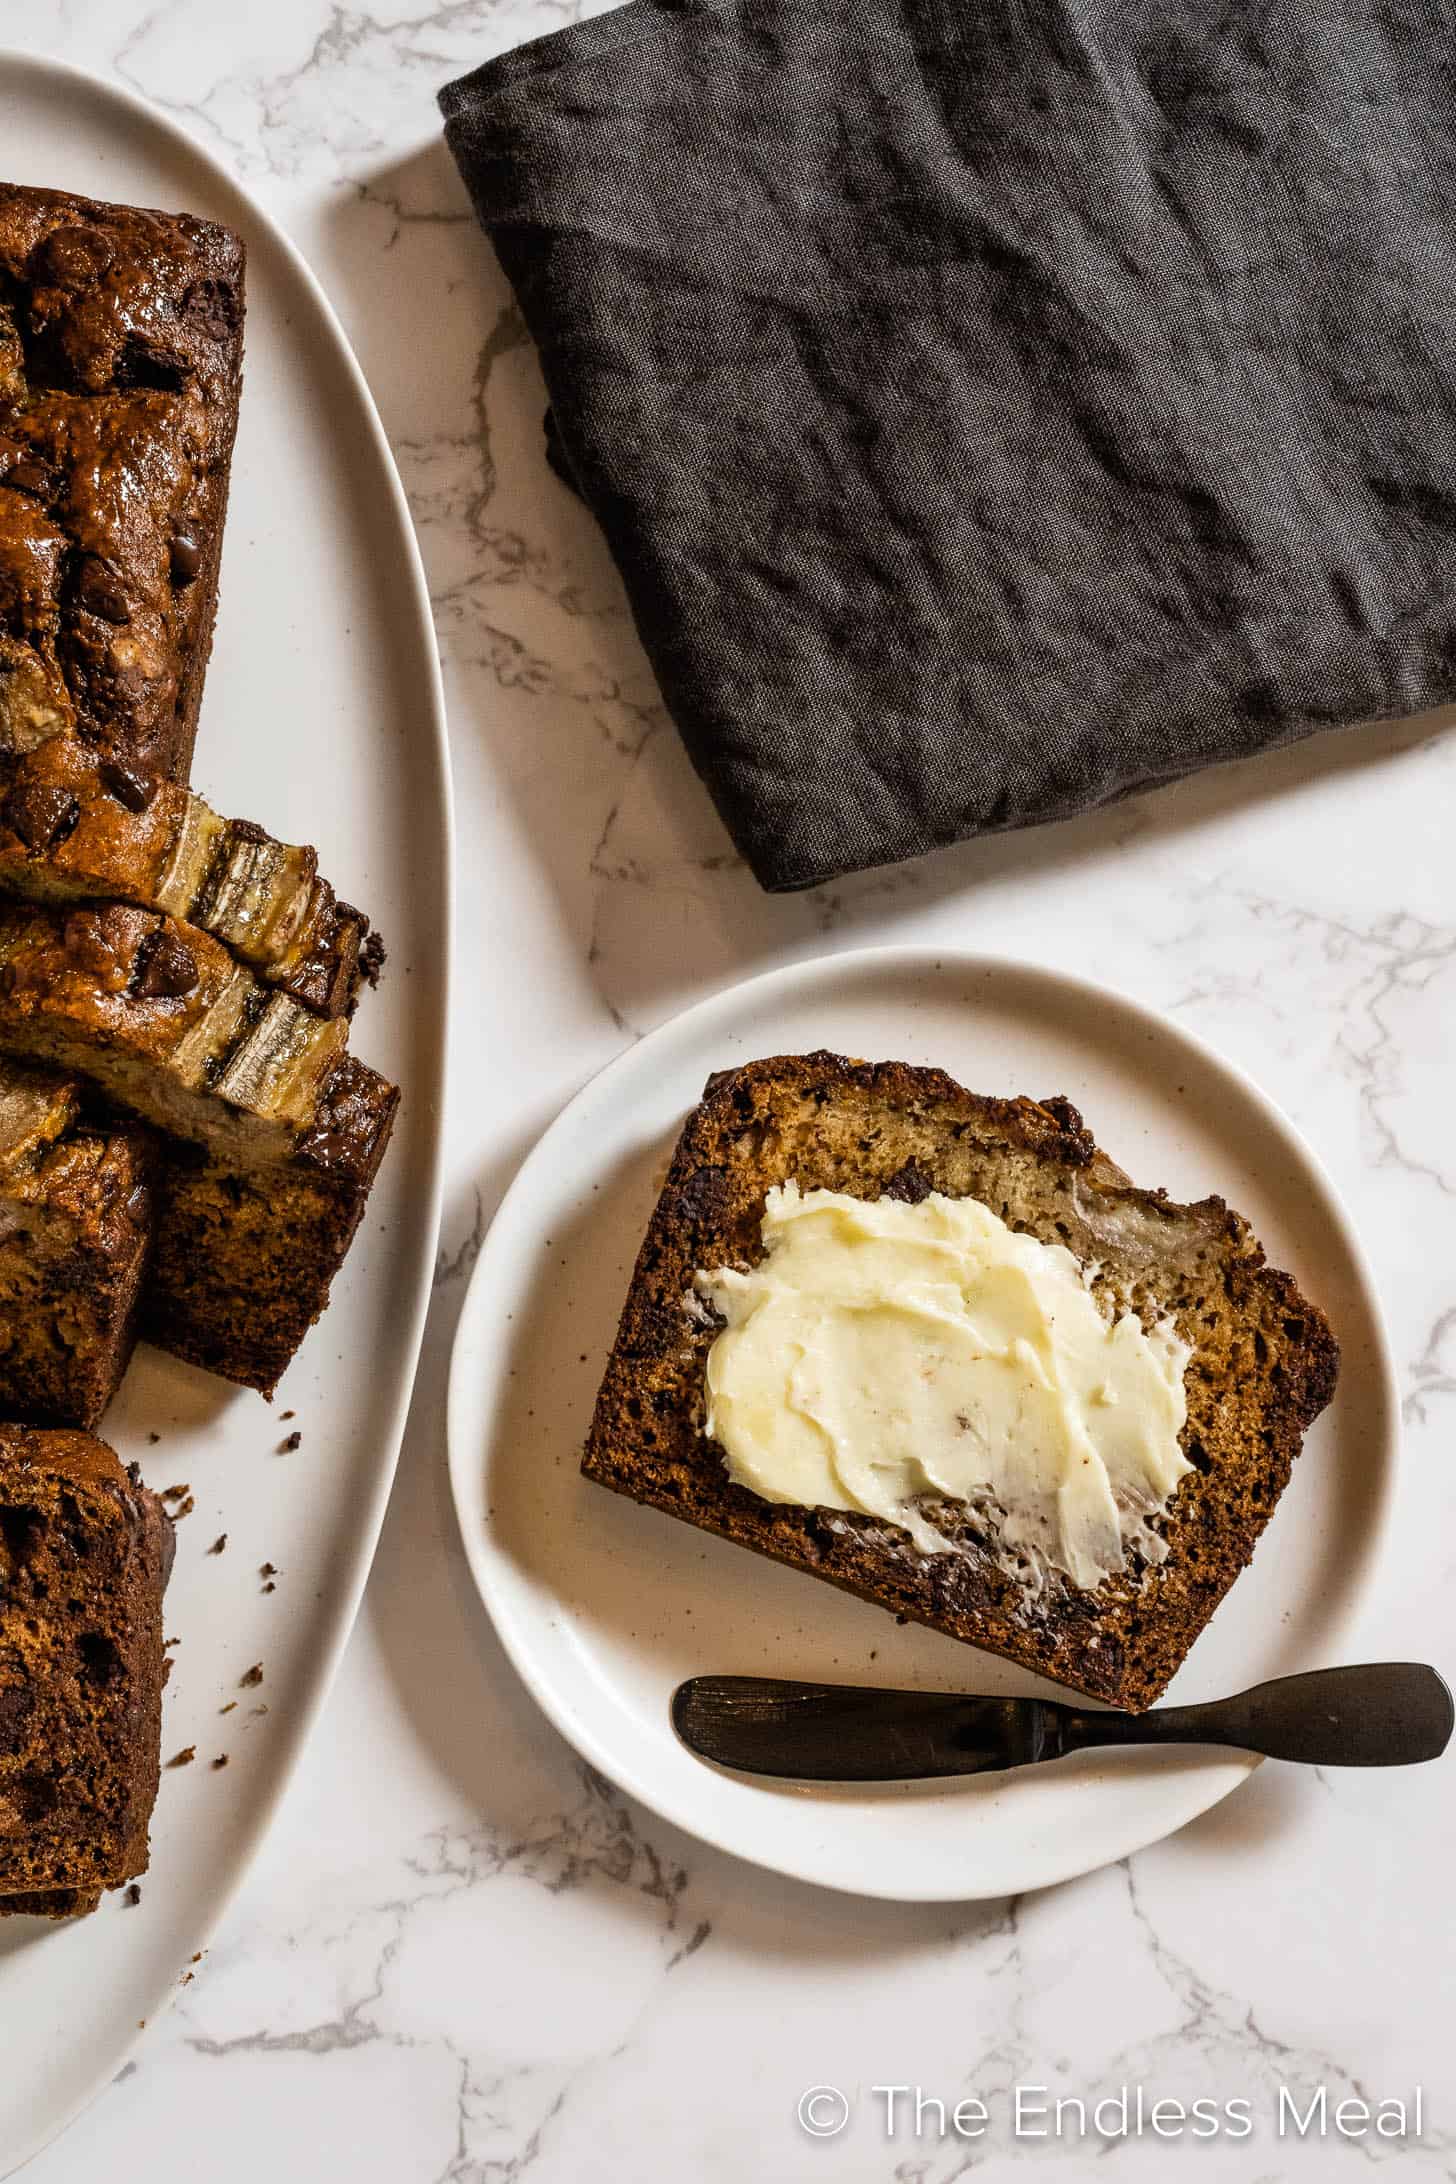 A slice of buttered six banana bread on a plate